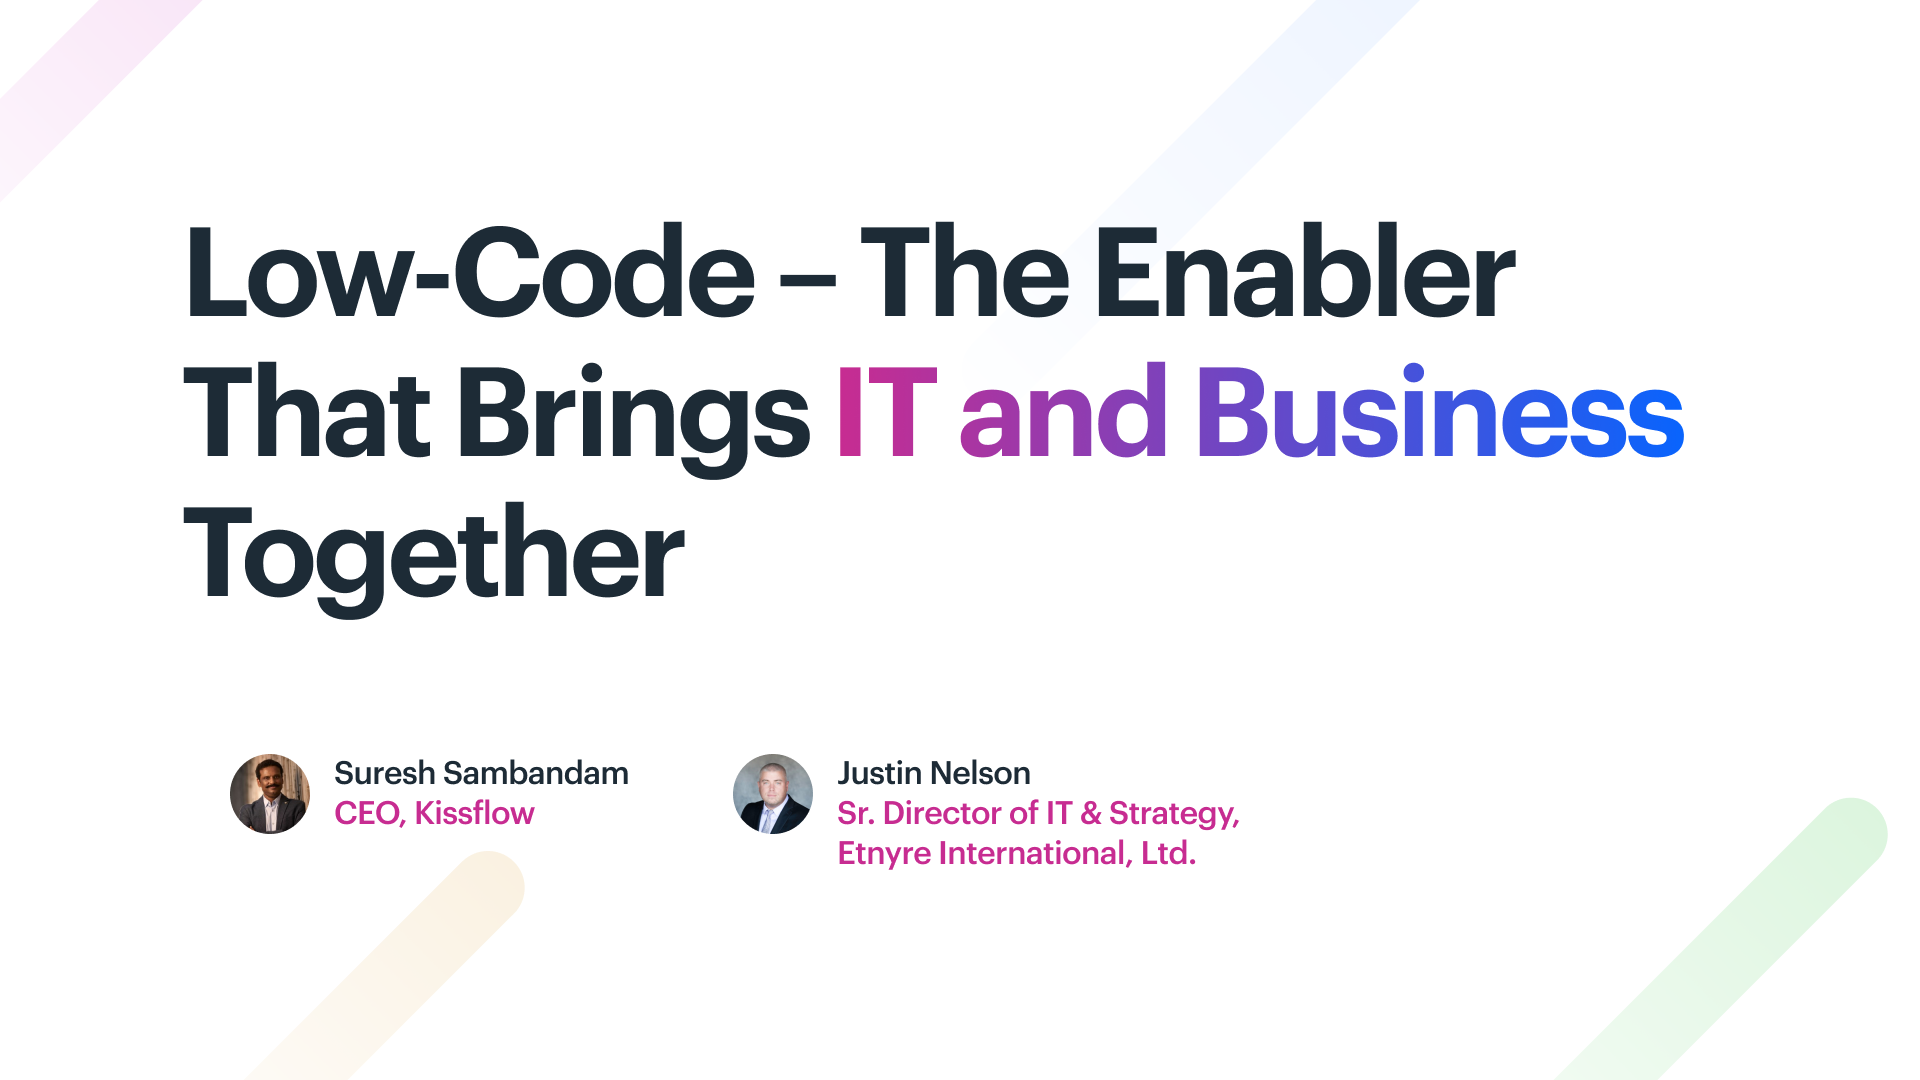 Low-Code – The Enabler That Brings IT and Business Together